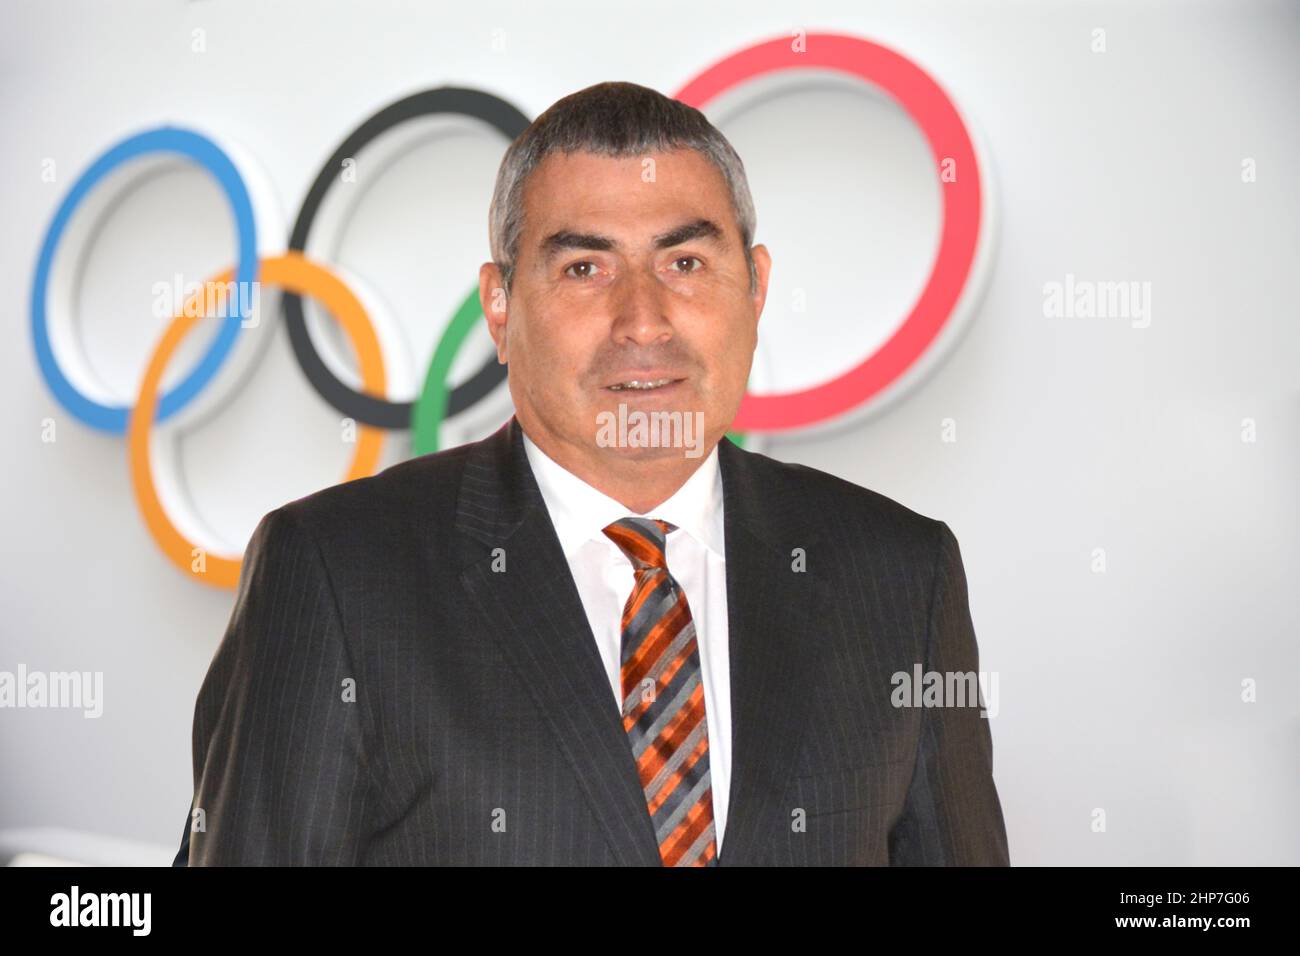 Istanbul. 19th Feb, 2022. File photo provided by the National Olympic Committee of Turkey shows a portrait of Ugur Erdener, a member of the International Olympic Committee (IOC) and president of the National Olympic Committee of Turkey. The Beijing 2022 Winter Olympics offer a safe and secure environment for all participants, thanks to well-planned and well-prepared health measures, Erdener told Xinhua in a recent online interview.TO GO WITH 'Interview: IOC member says Beijing Olympics offers safe environment with well-planned measures' Credit: Xinhua/Alamy Live News Stock Photo